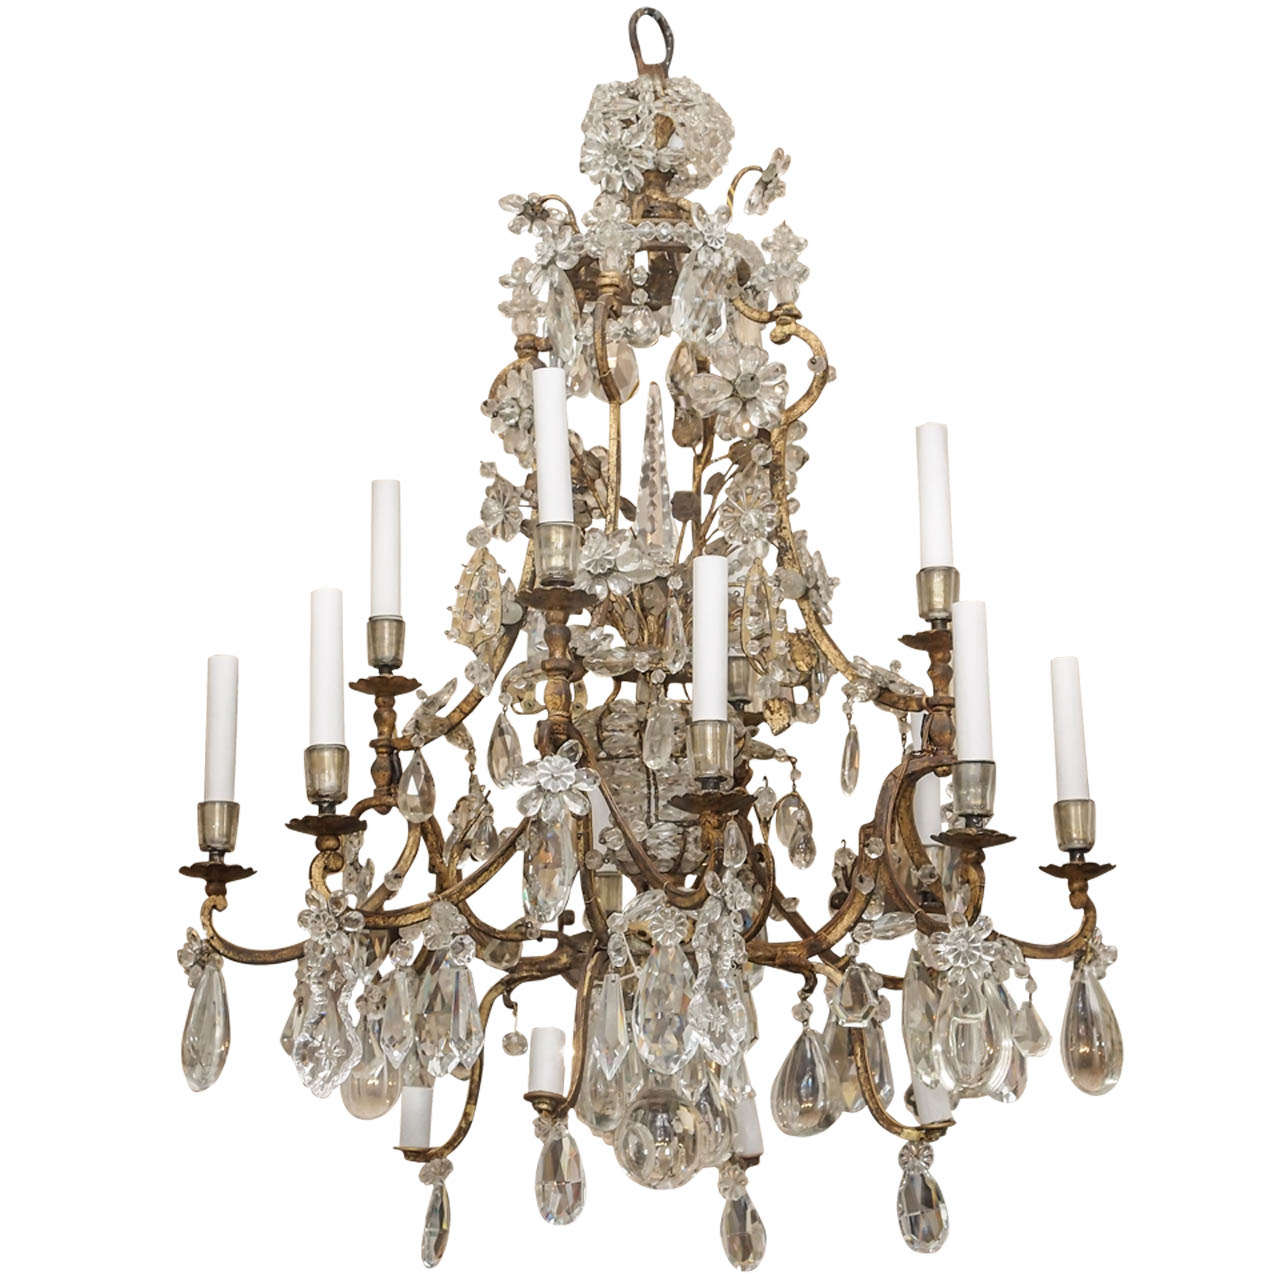 Iron and Rock Crystal Chandelier